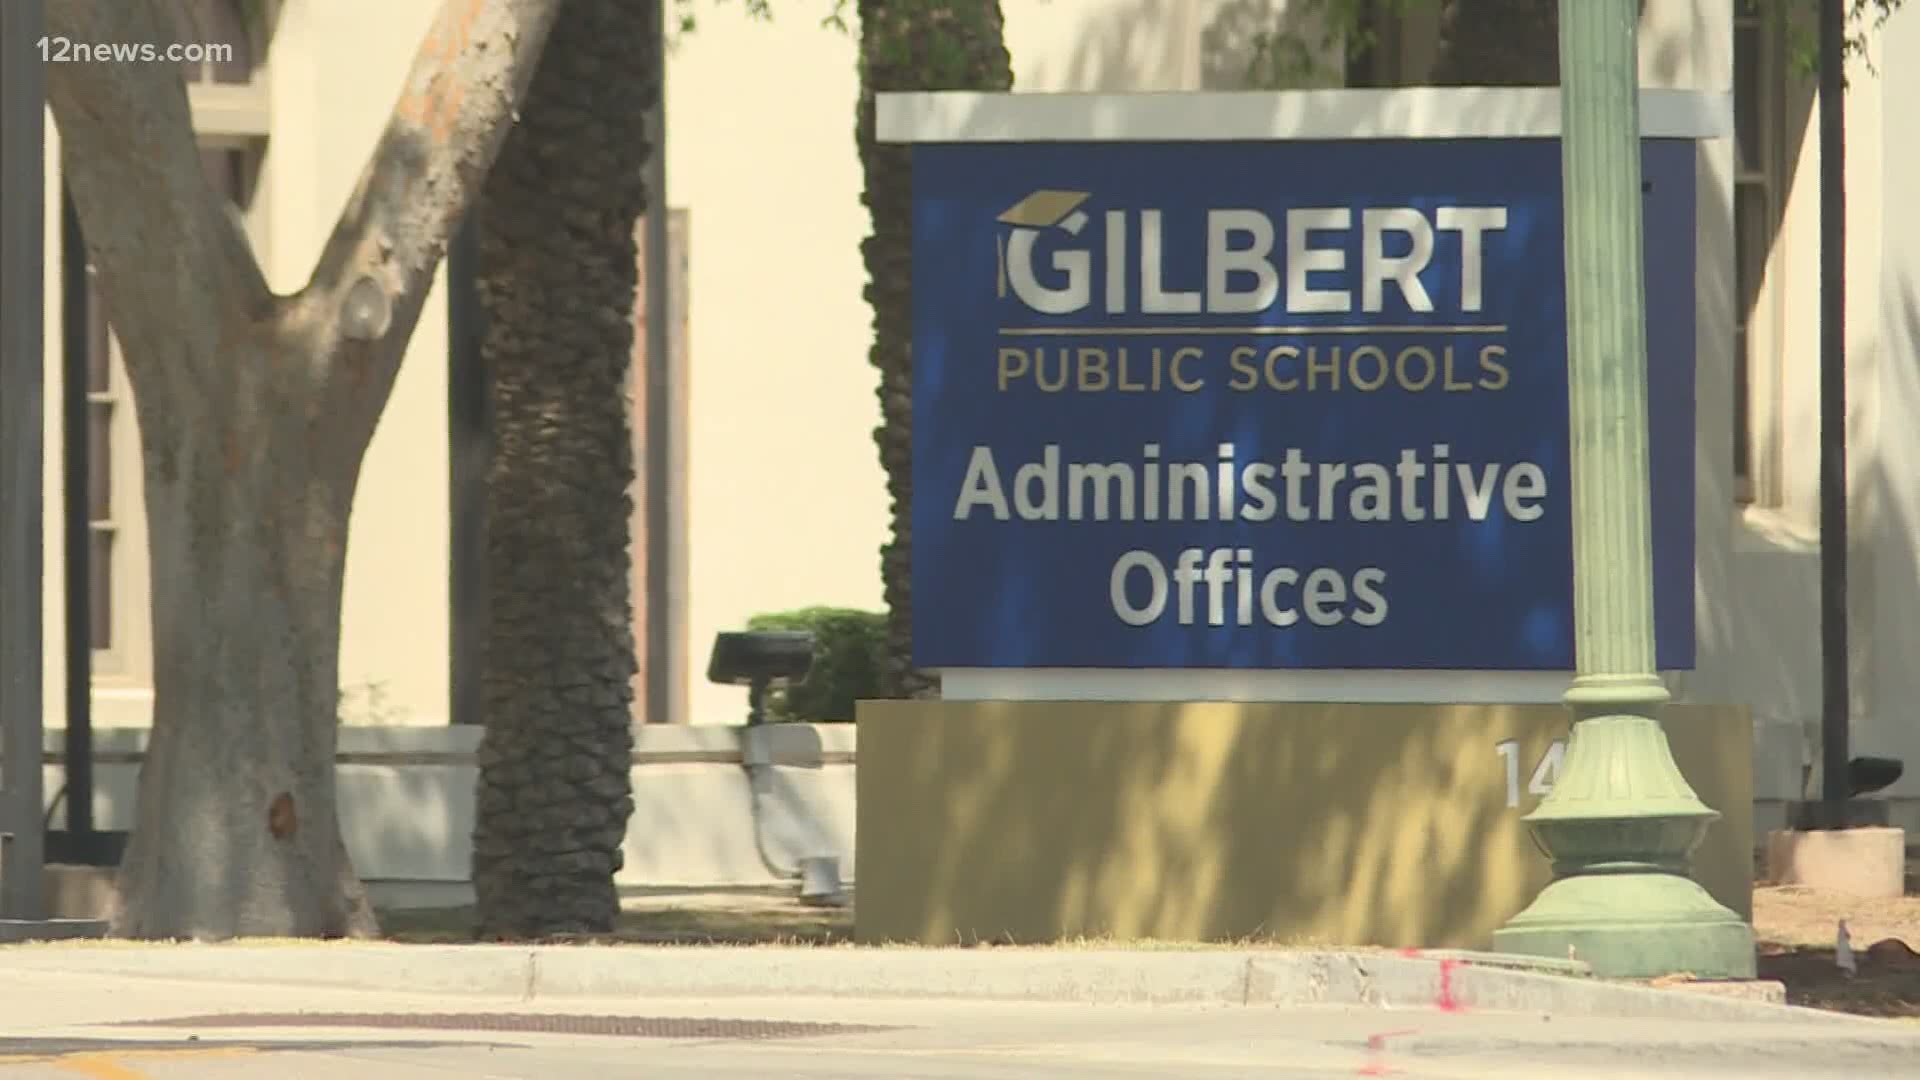 Two weeks after laying off more than 150 teachers, Gilbert Public Schools is raising salaries of those that will get a contract for next year.